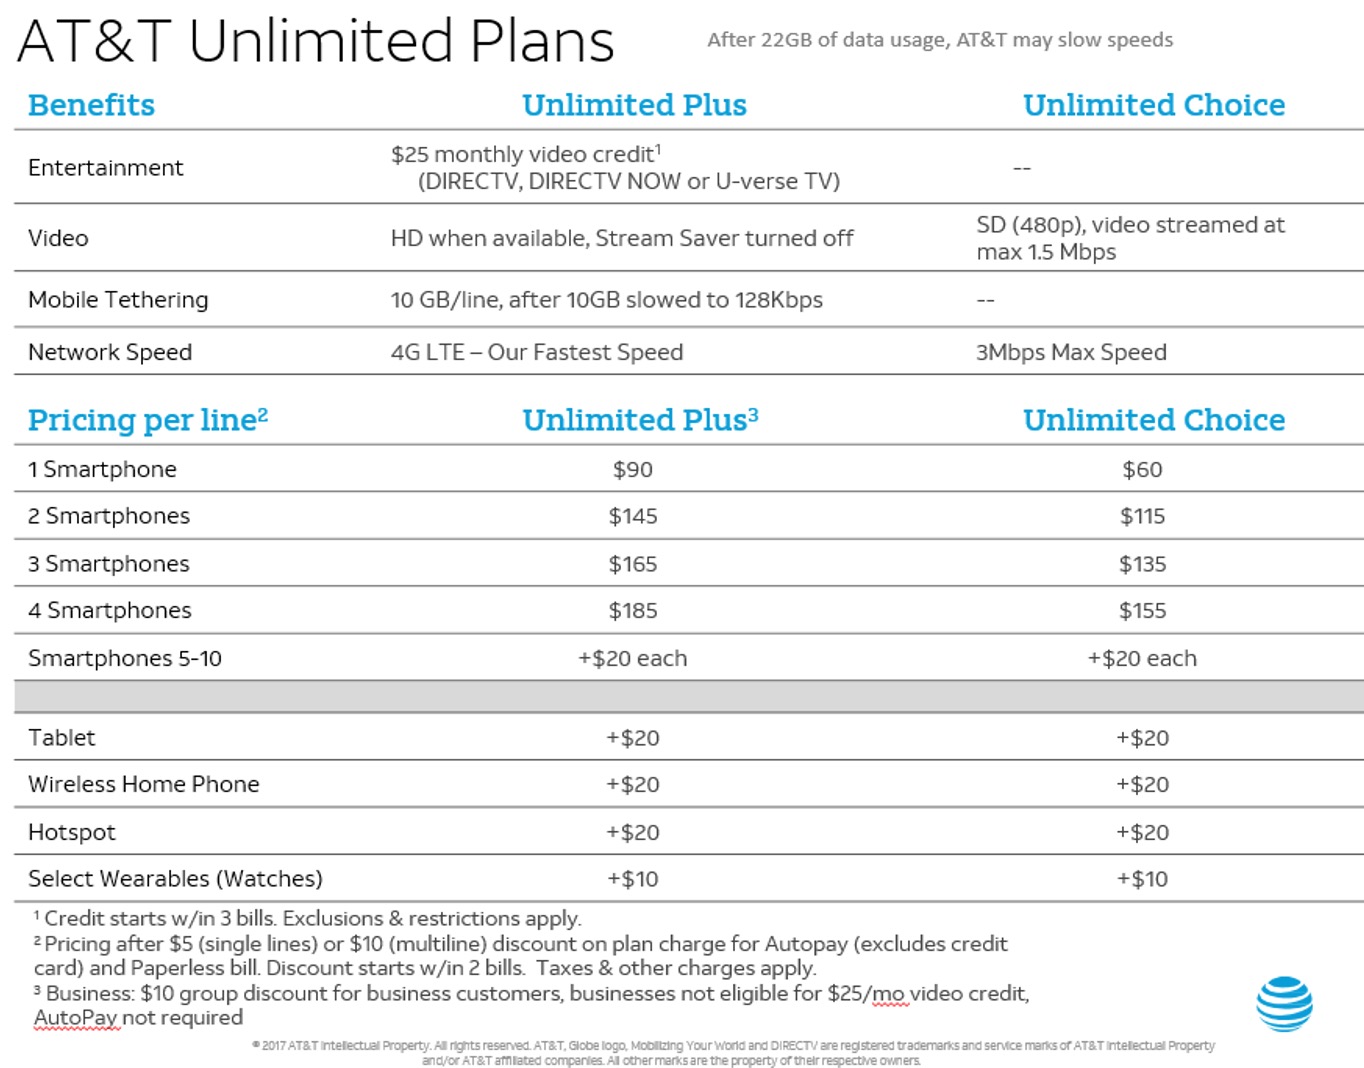 AT&T Introduces Two New Unlimited Plans, Plus and Choice - TechGreatest